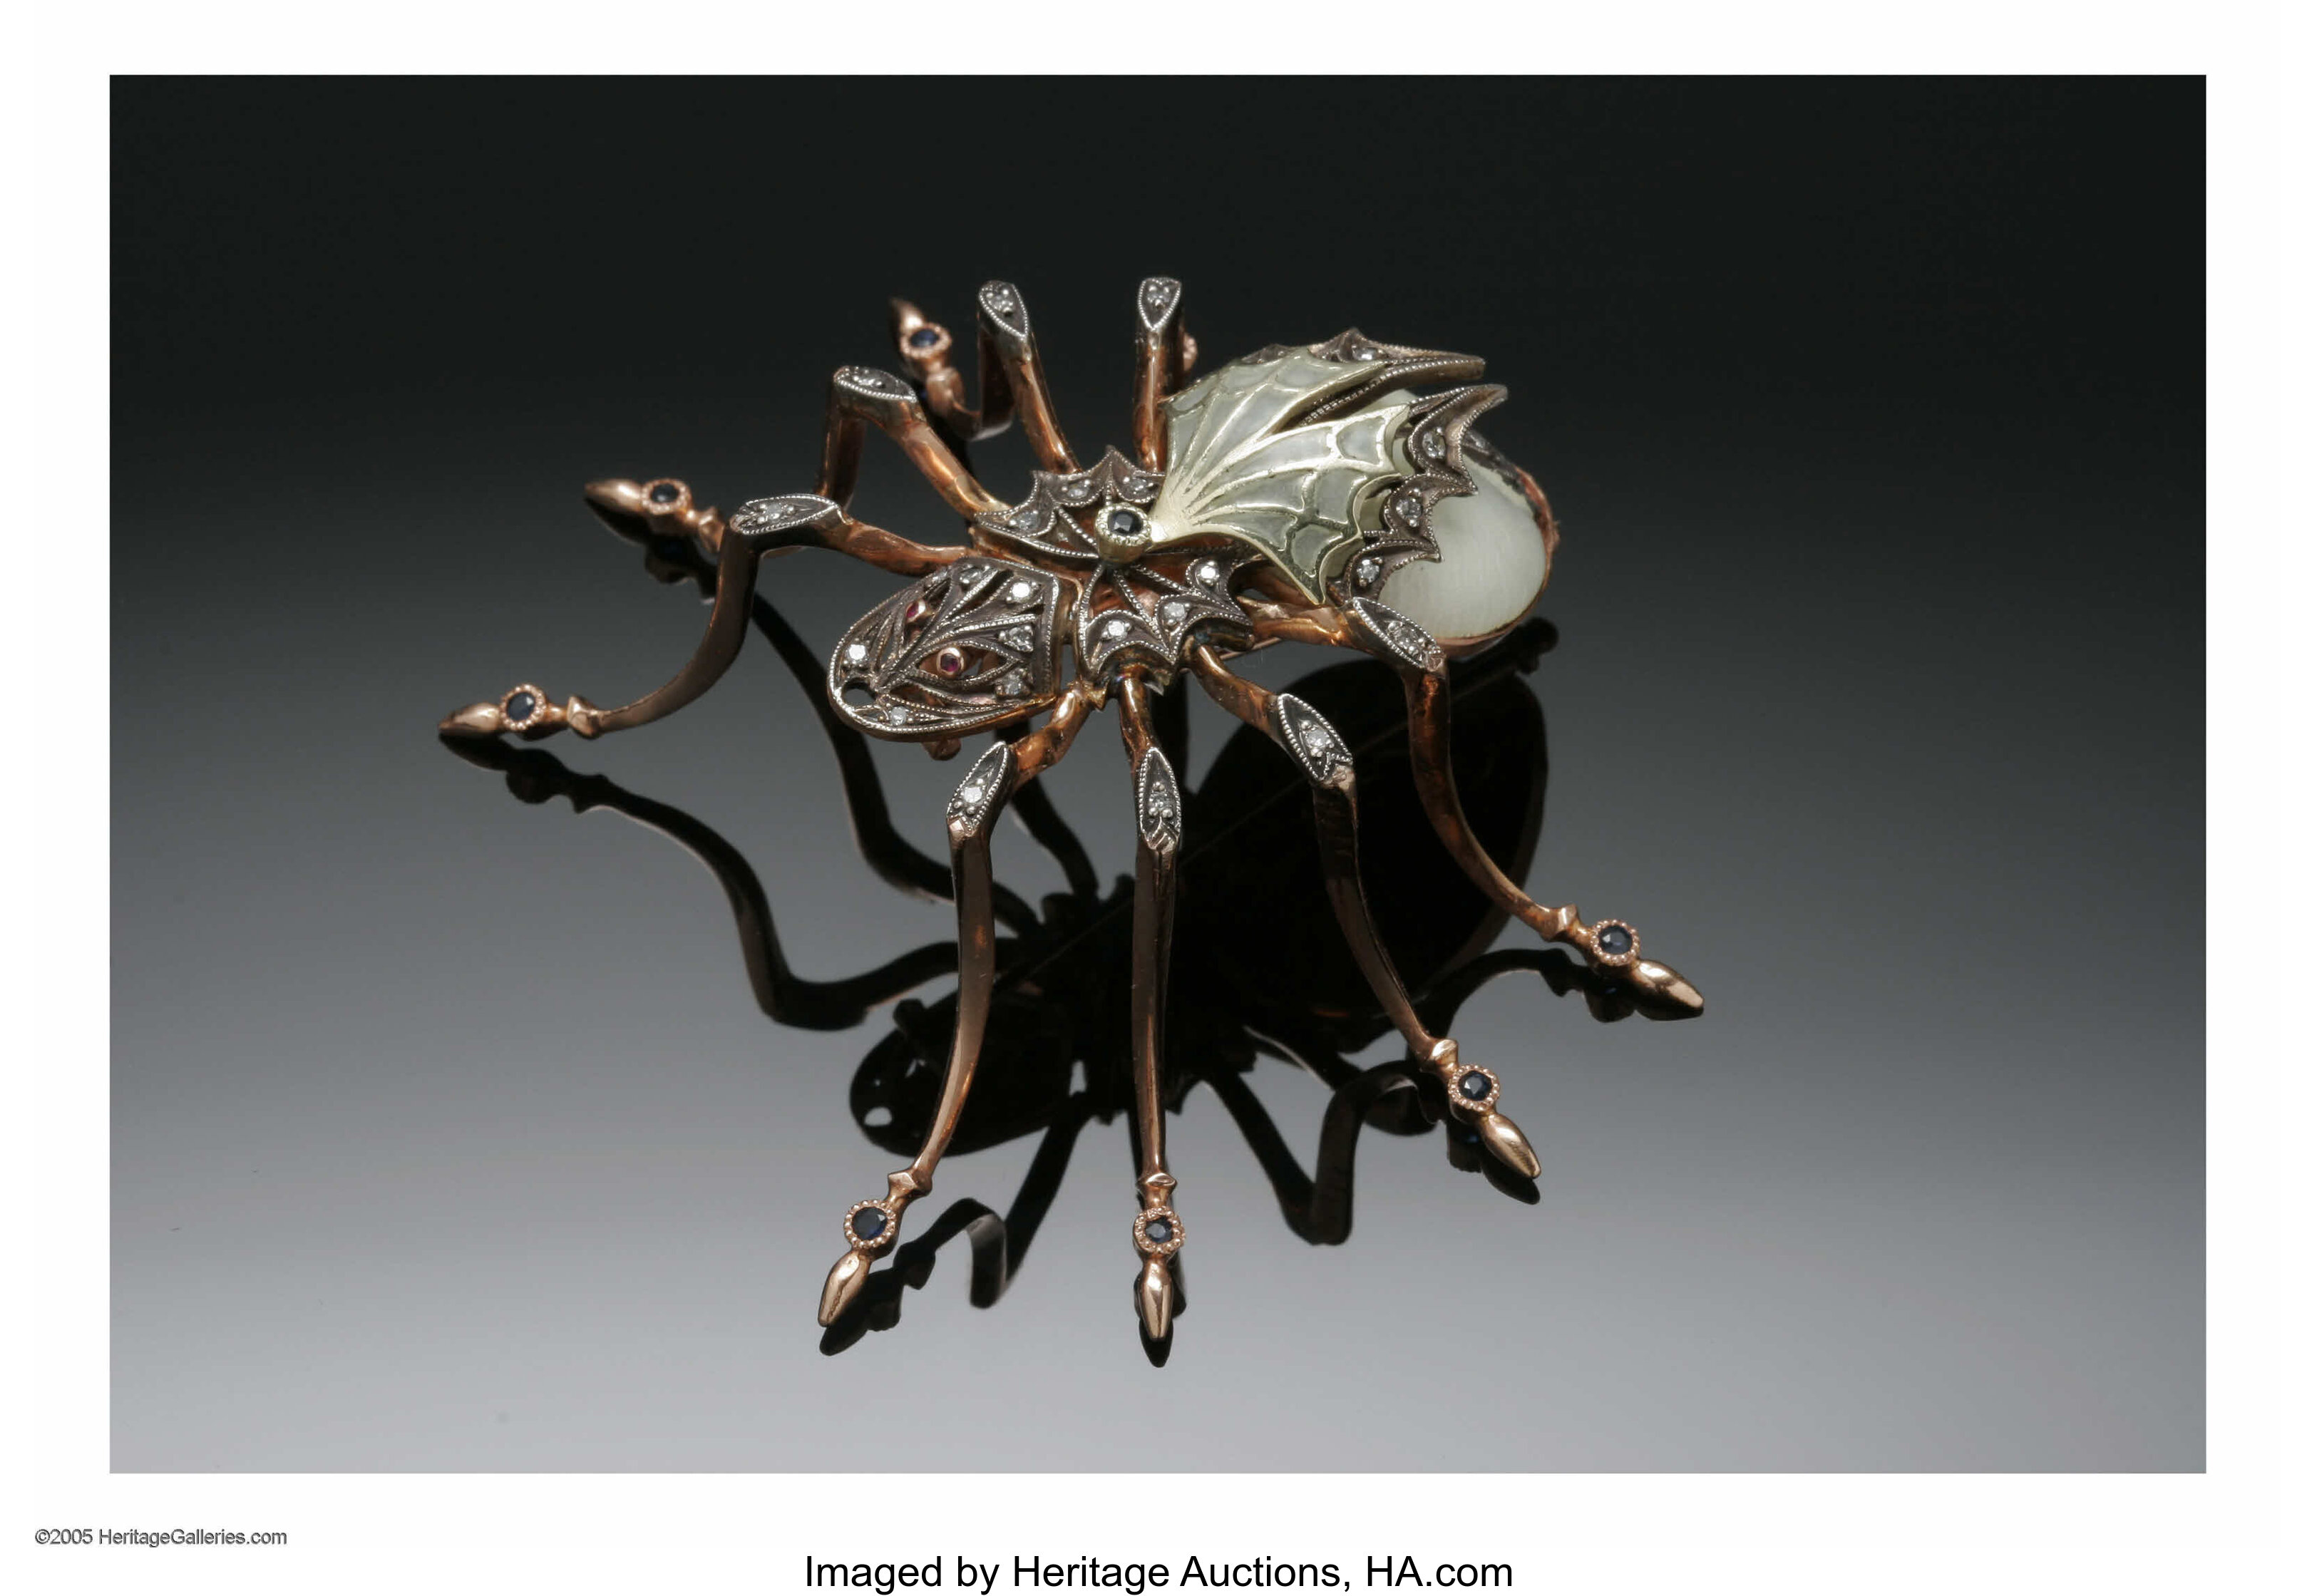 A 14K Gold Spider Brooch Topped With Ivory Colored Guilloche Set